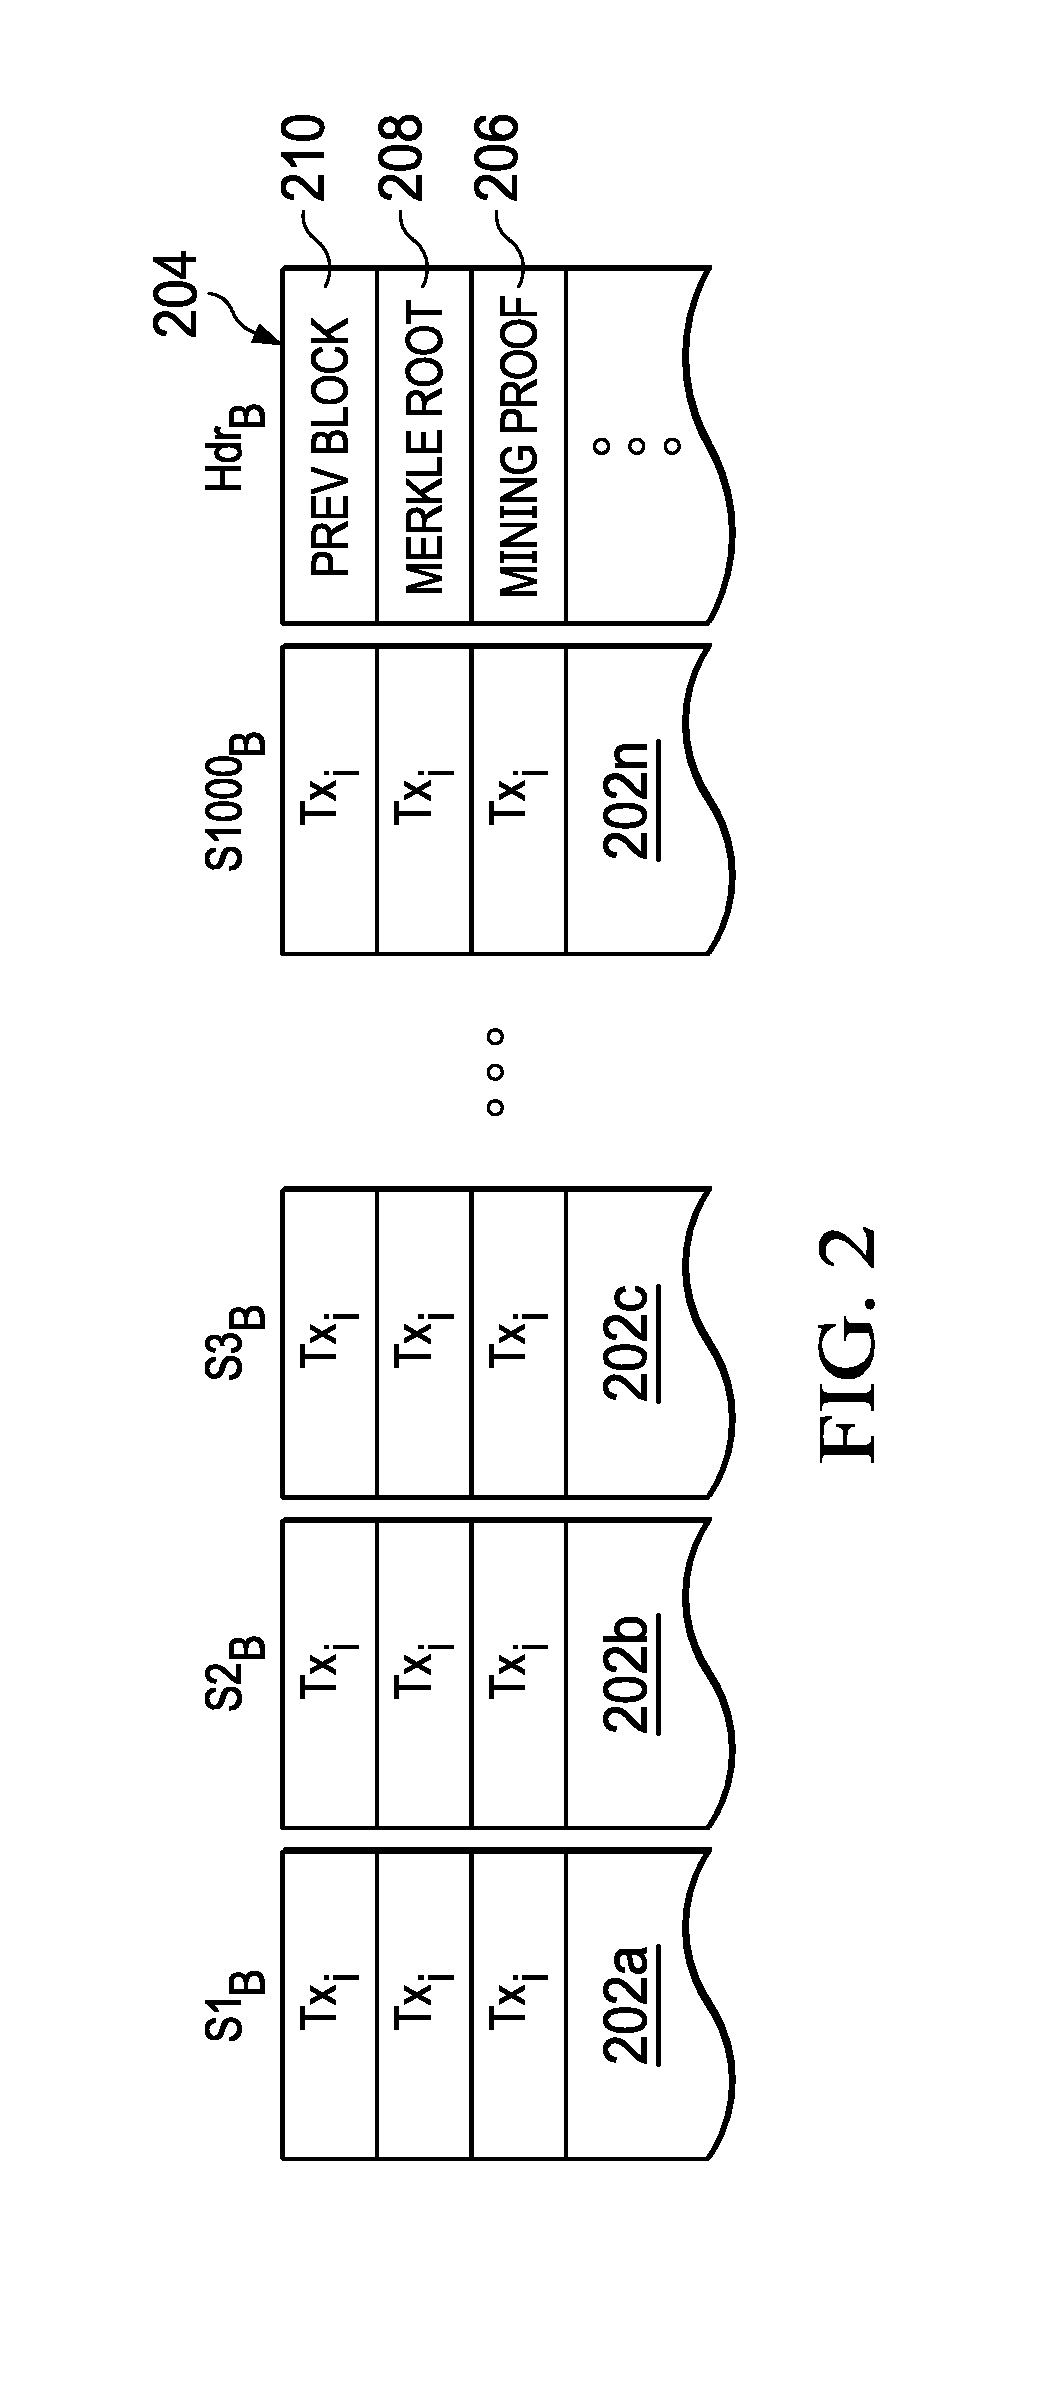 Concurrent transaction processing in a high performance distributed system of record